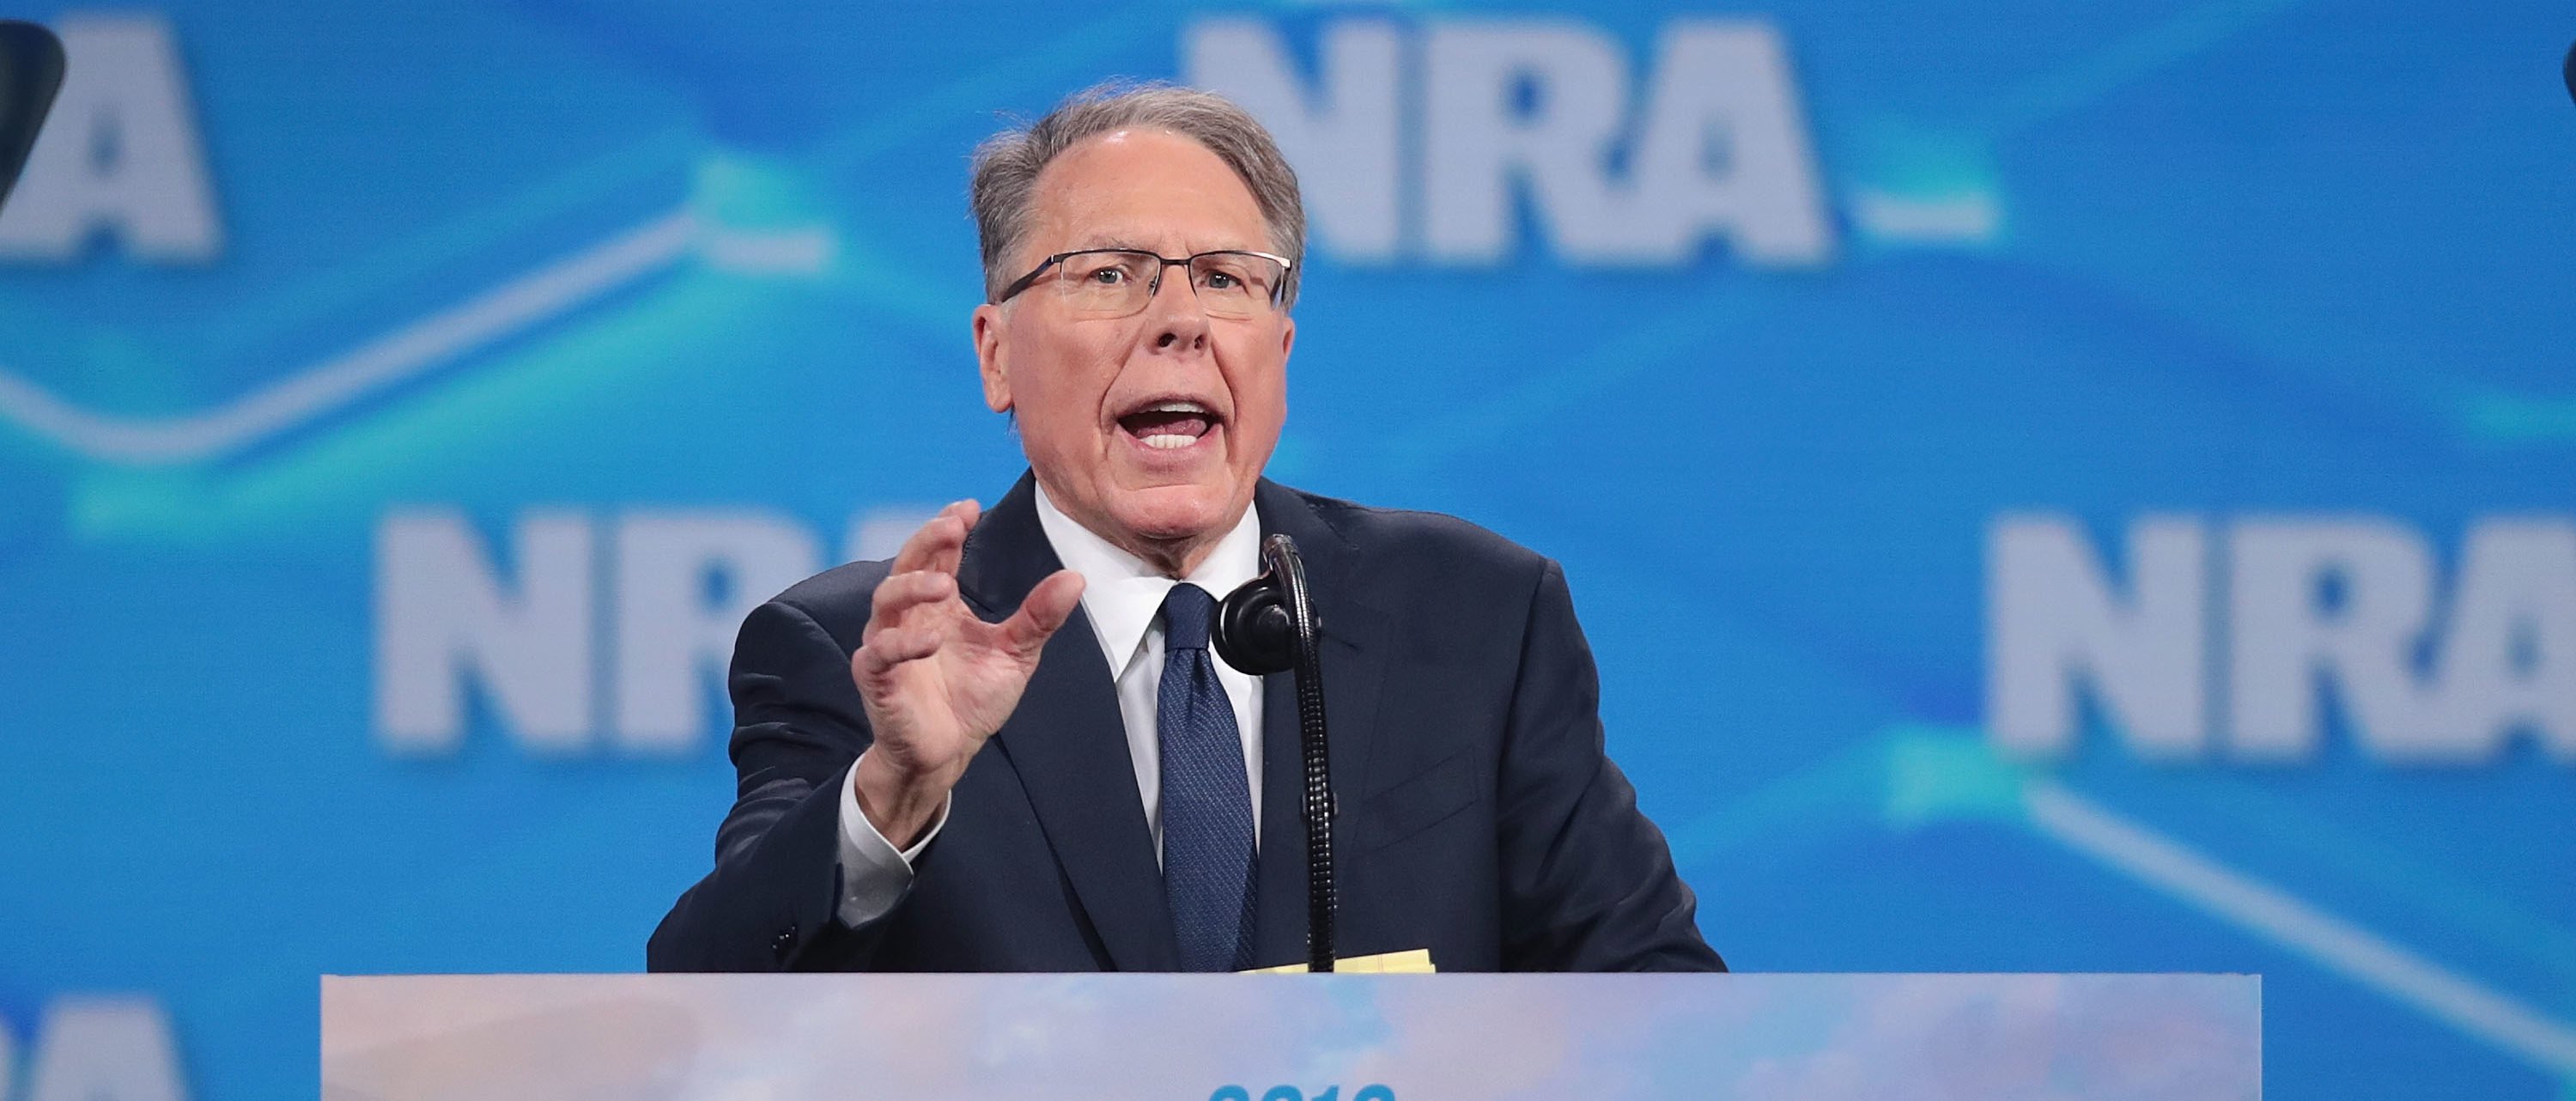 INDIANAPOLIS, INDIANA - APRIL 26: Wayne LaPierre, NRA vice president and CEO, speaks to guests at the NRA-ILA Leadership Forum at the 148th NRA Annual Meetings & Exhibits on April 26, 2019 in Indianapolis, Indiana. The convention, which runs through Sunday, features more than 800 exhibitors and is expected to draw 80,000 guests. (Photo by Scott Olson/Getty Images)